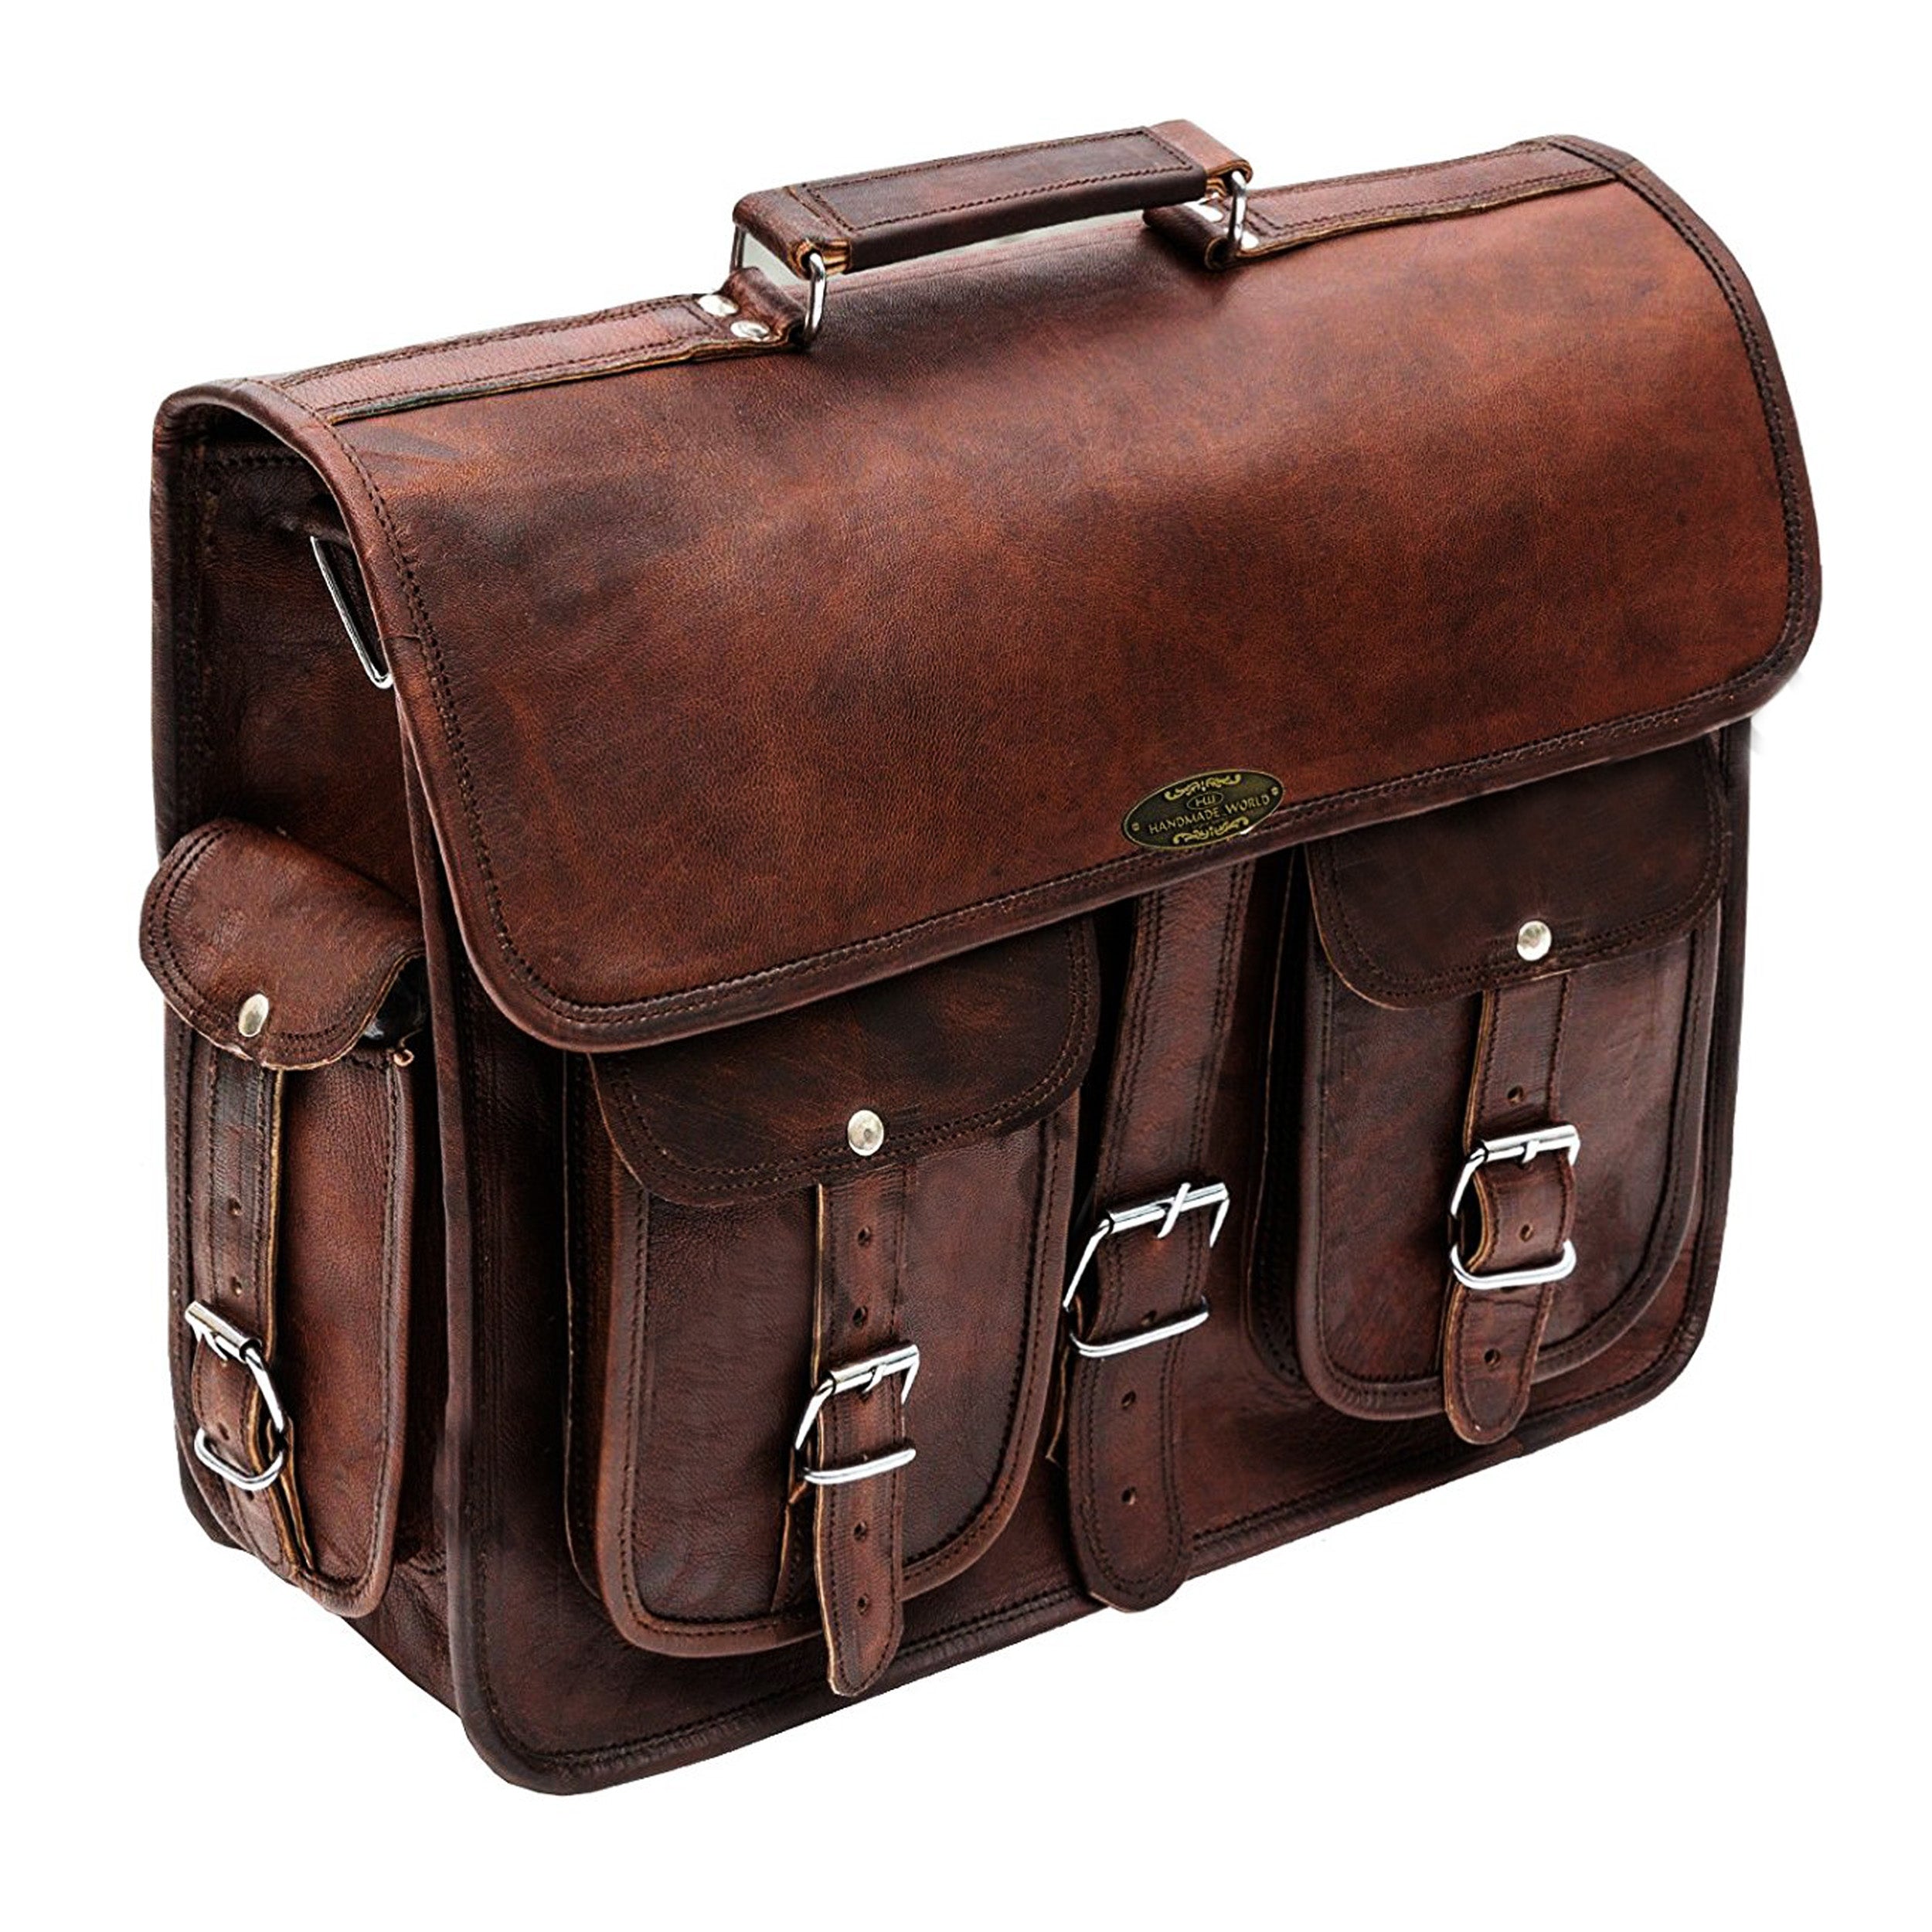 Genuine Leather Messenger Briefcase Laptop Bag with top handle